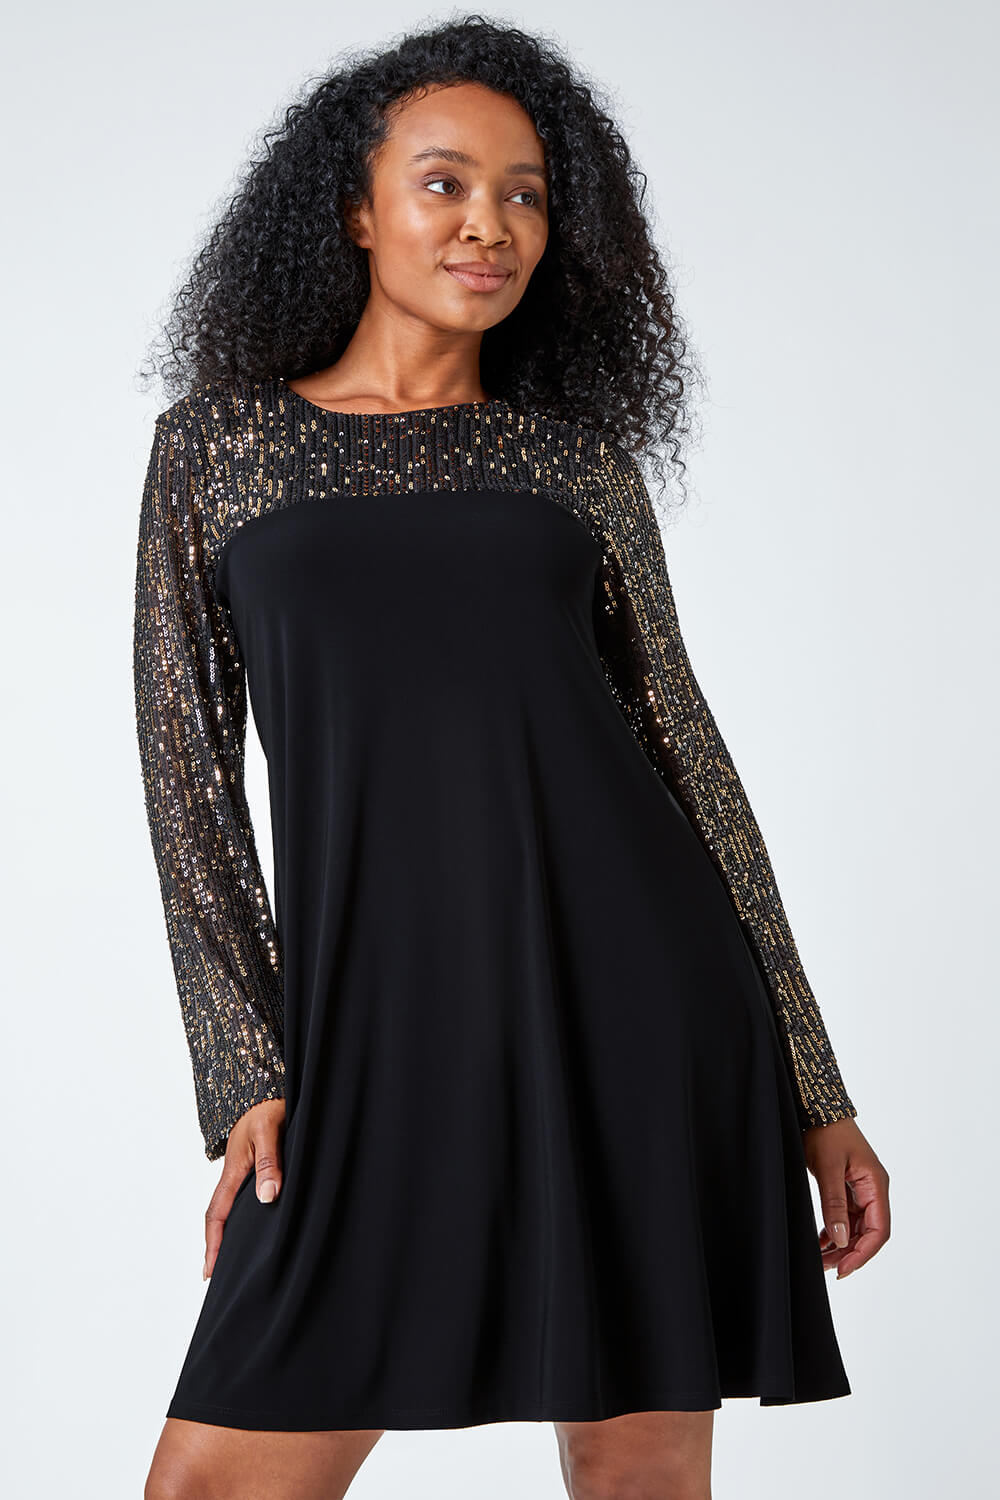 Gold Petite Sequin Shift Stretch Dress, Image 2 of 5